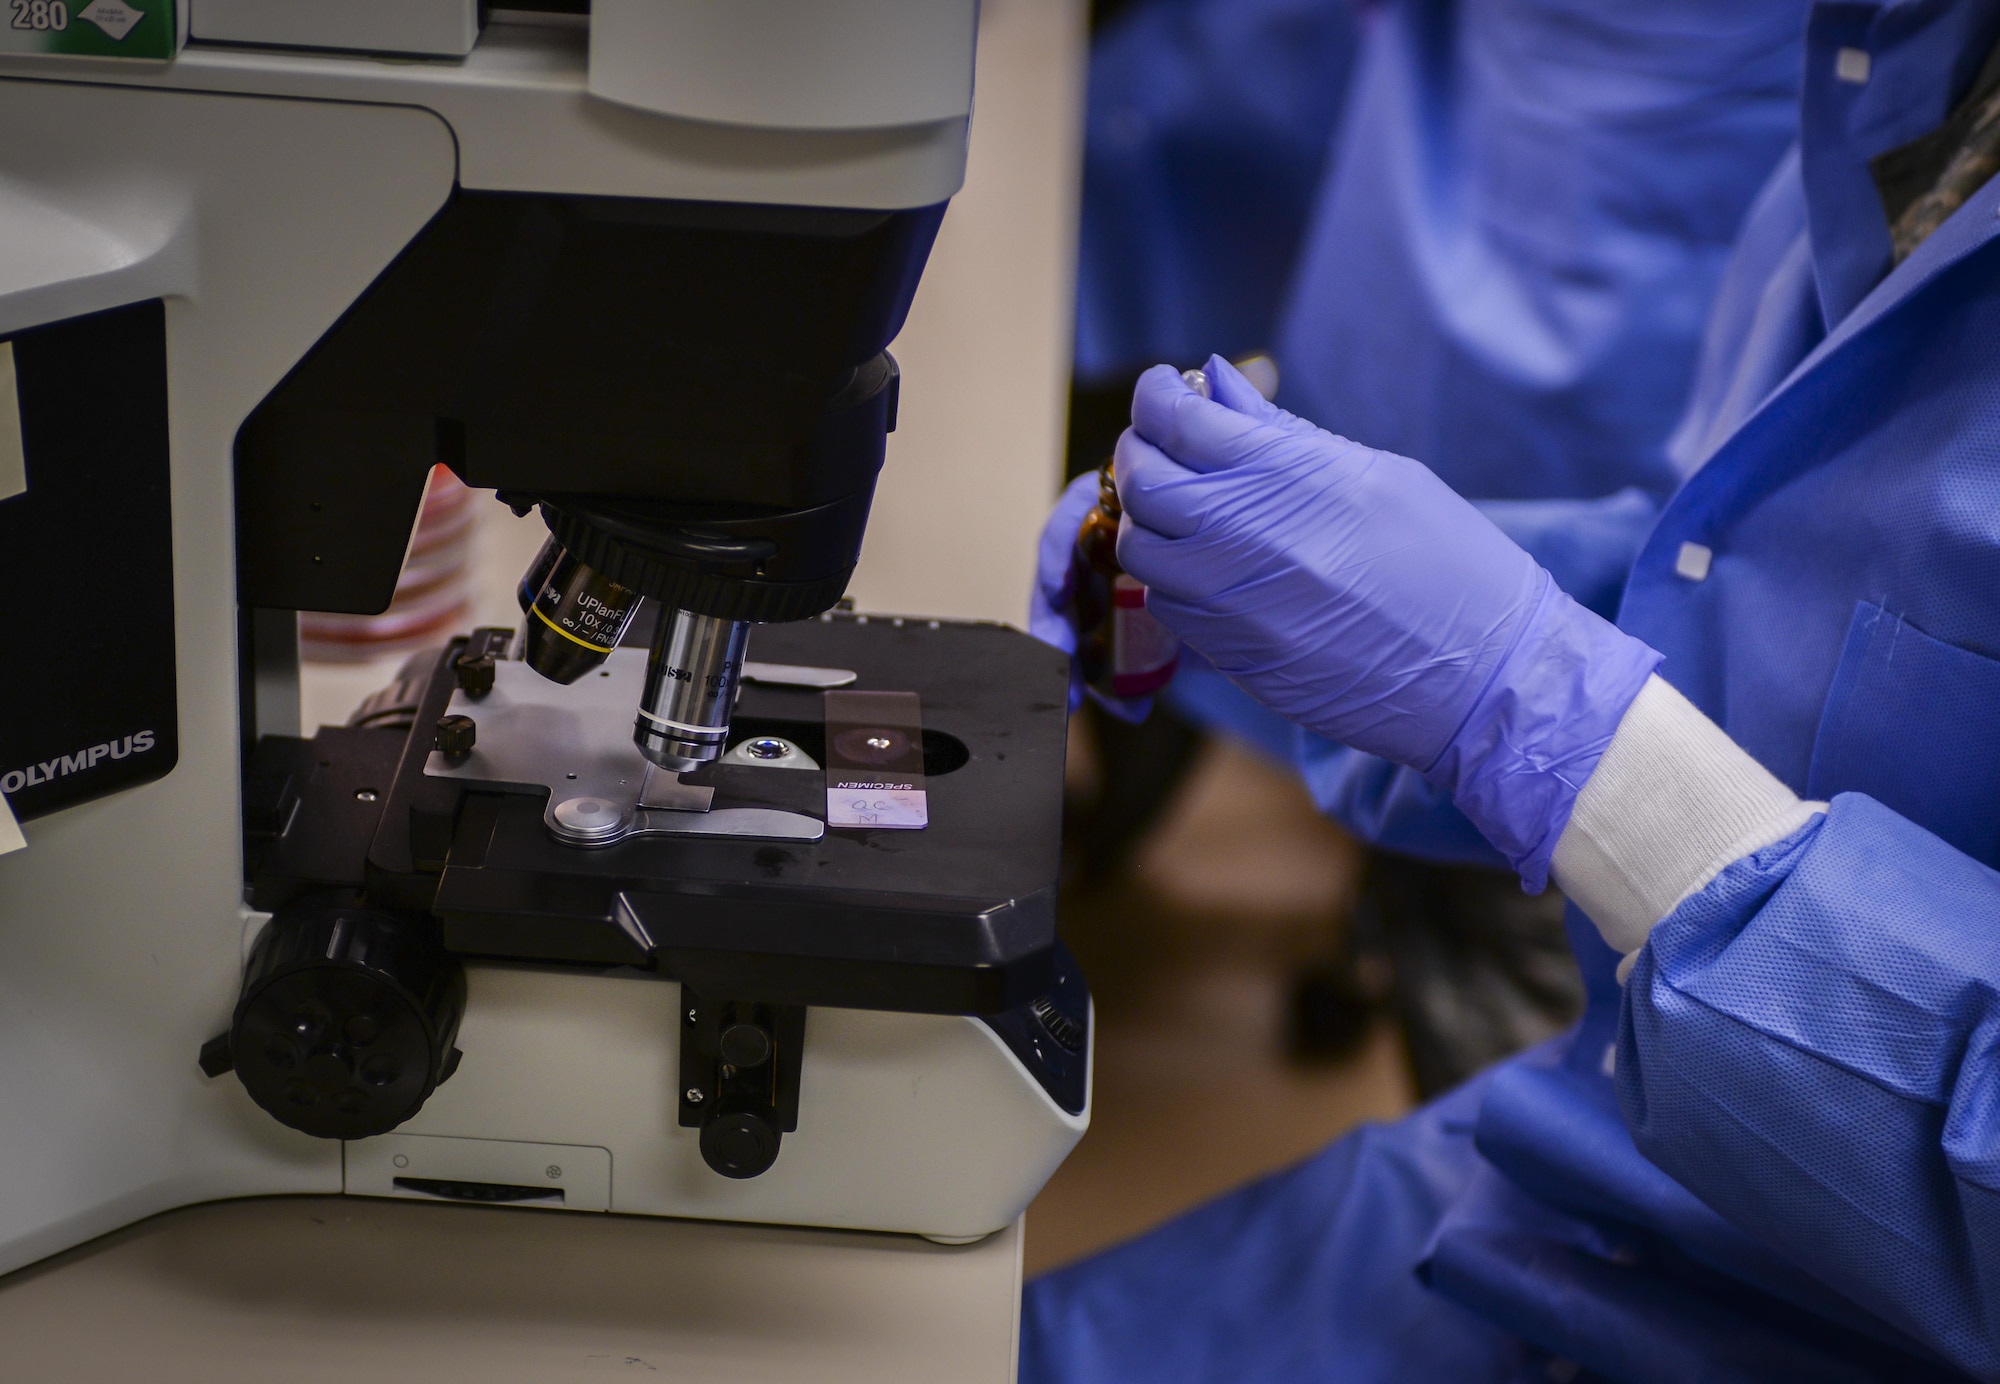 A medical laboratory technician, assigned to the 99th Medical Support Squadron, prepares a slide in the microbiology department in the 99th Medical Group at Nellis Air Force Base, Nev., April 15, 2016. Medical Laboratory Professionals Week provides the profession with a unique opportunity to increase public understanding of and appreciation for clinical laboratory personnel. (U.S. Air Force photo by Airman 1st Class Nathan Byrnes)